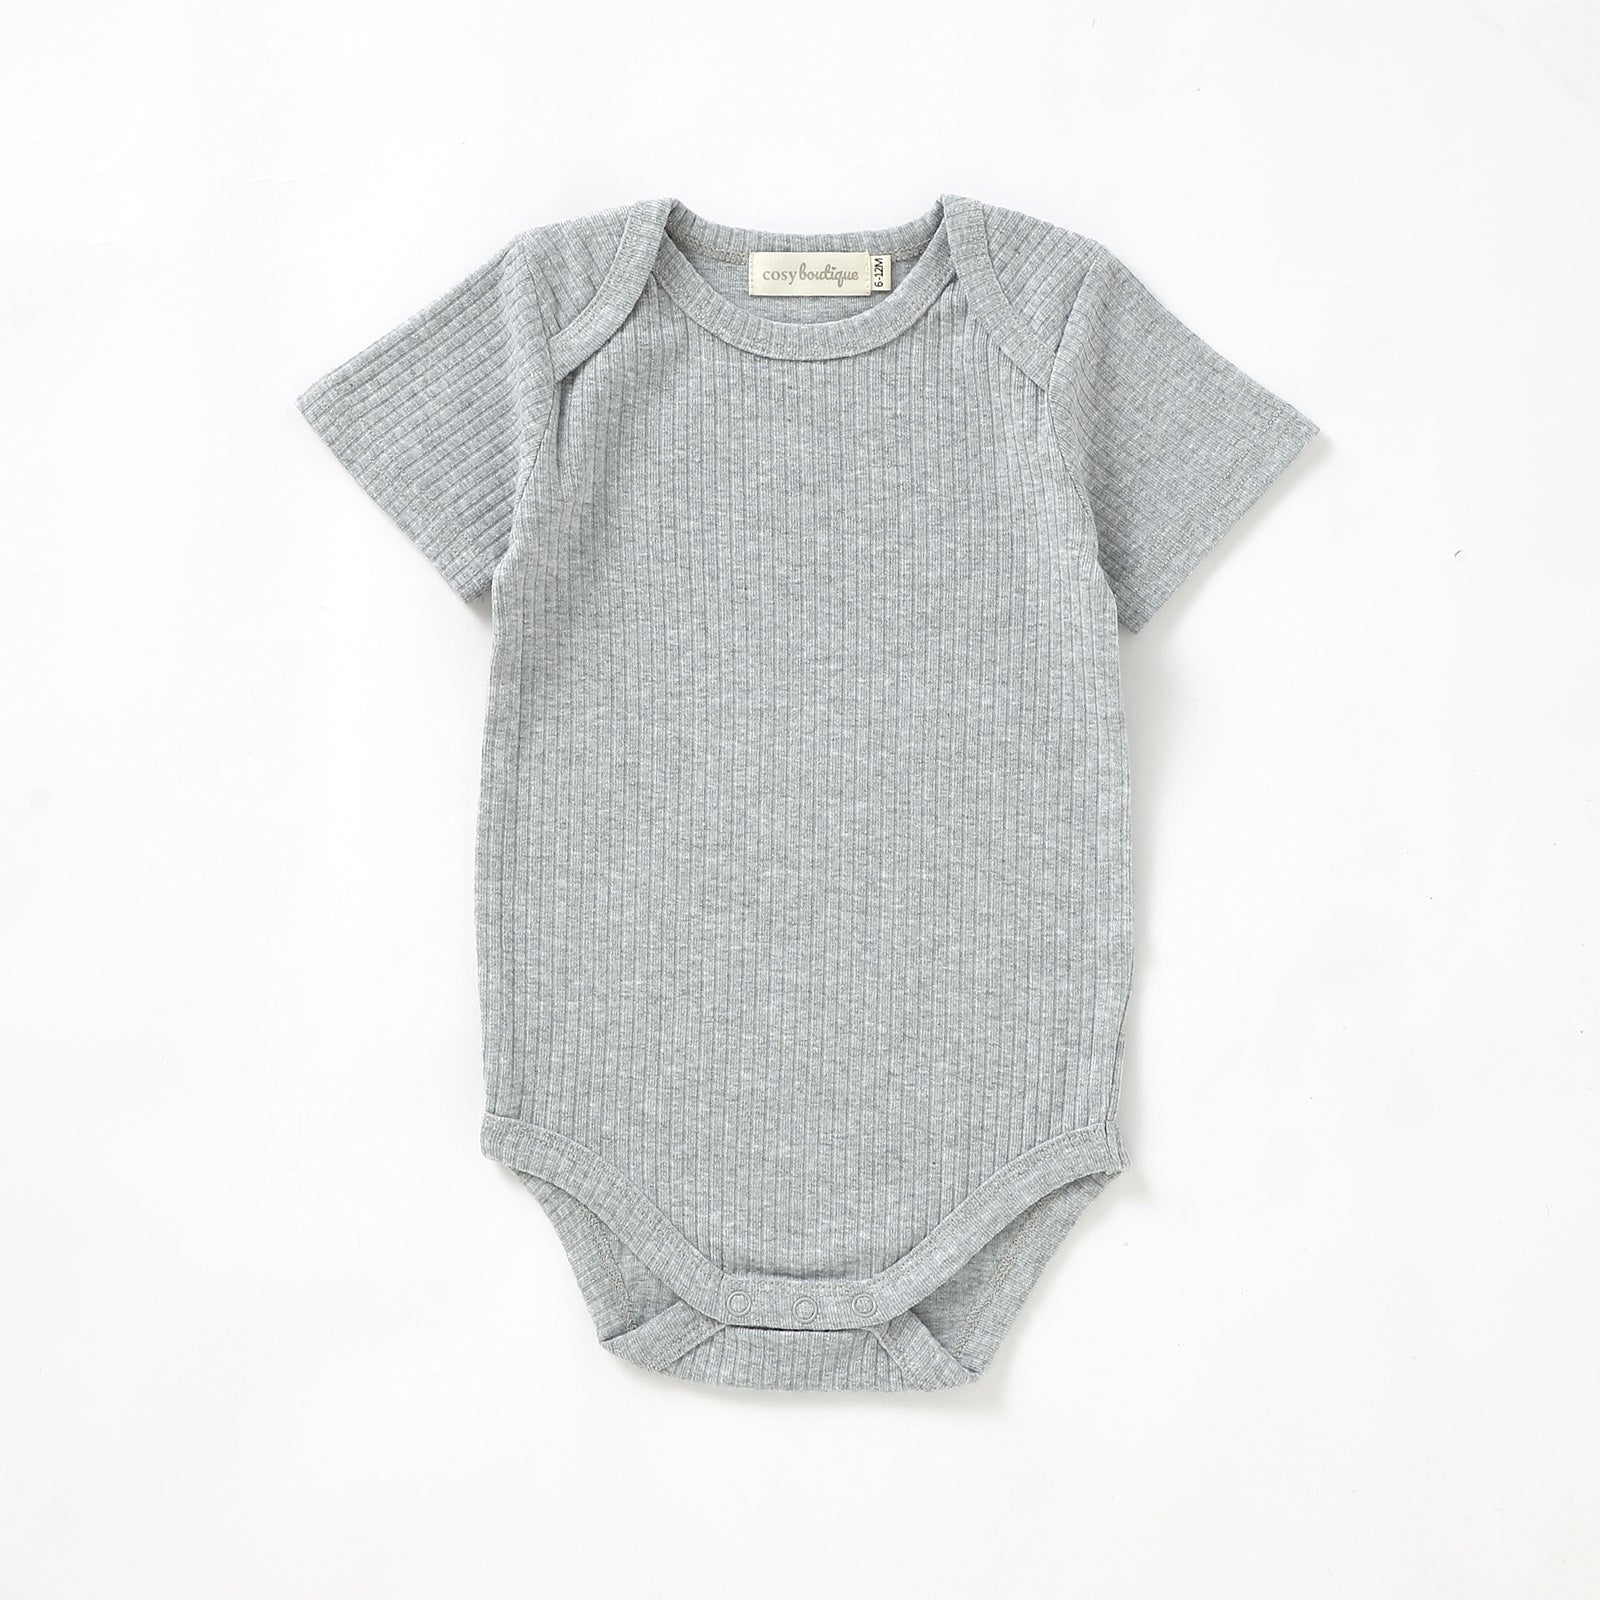 Organic Cotton Rib Short Sleeve Bodysuit 0-3 Months (000) / Dove | Baby Bodysuits | Boys & Girls Clothing | Babies, Toddlers & Kids | Cosy Boutique NZ